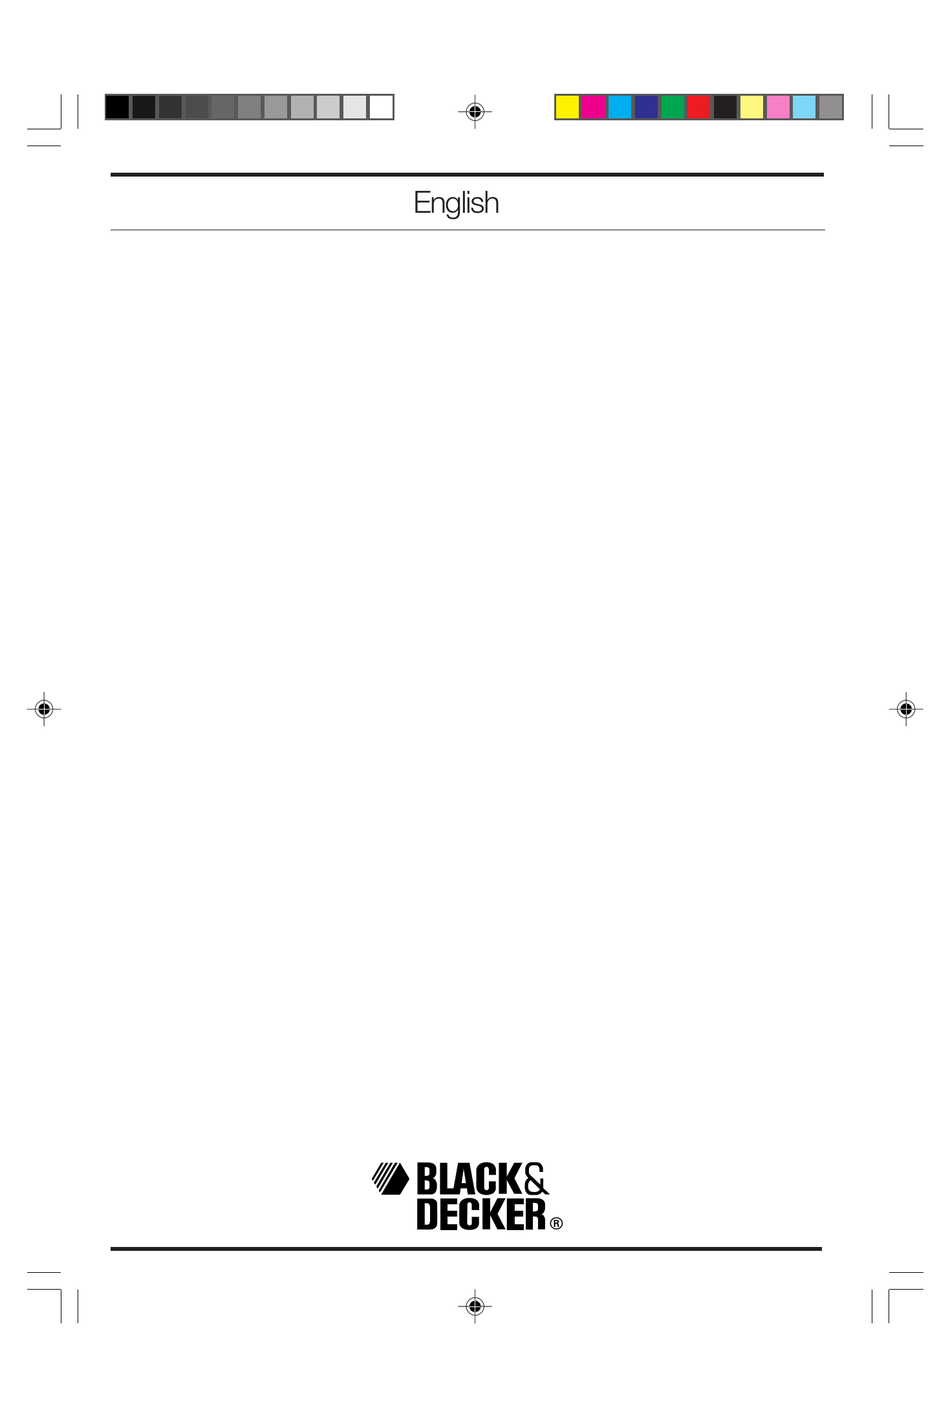 User manual Black & Decker GL653 (English - 12 pages)